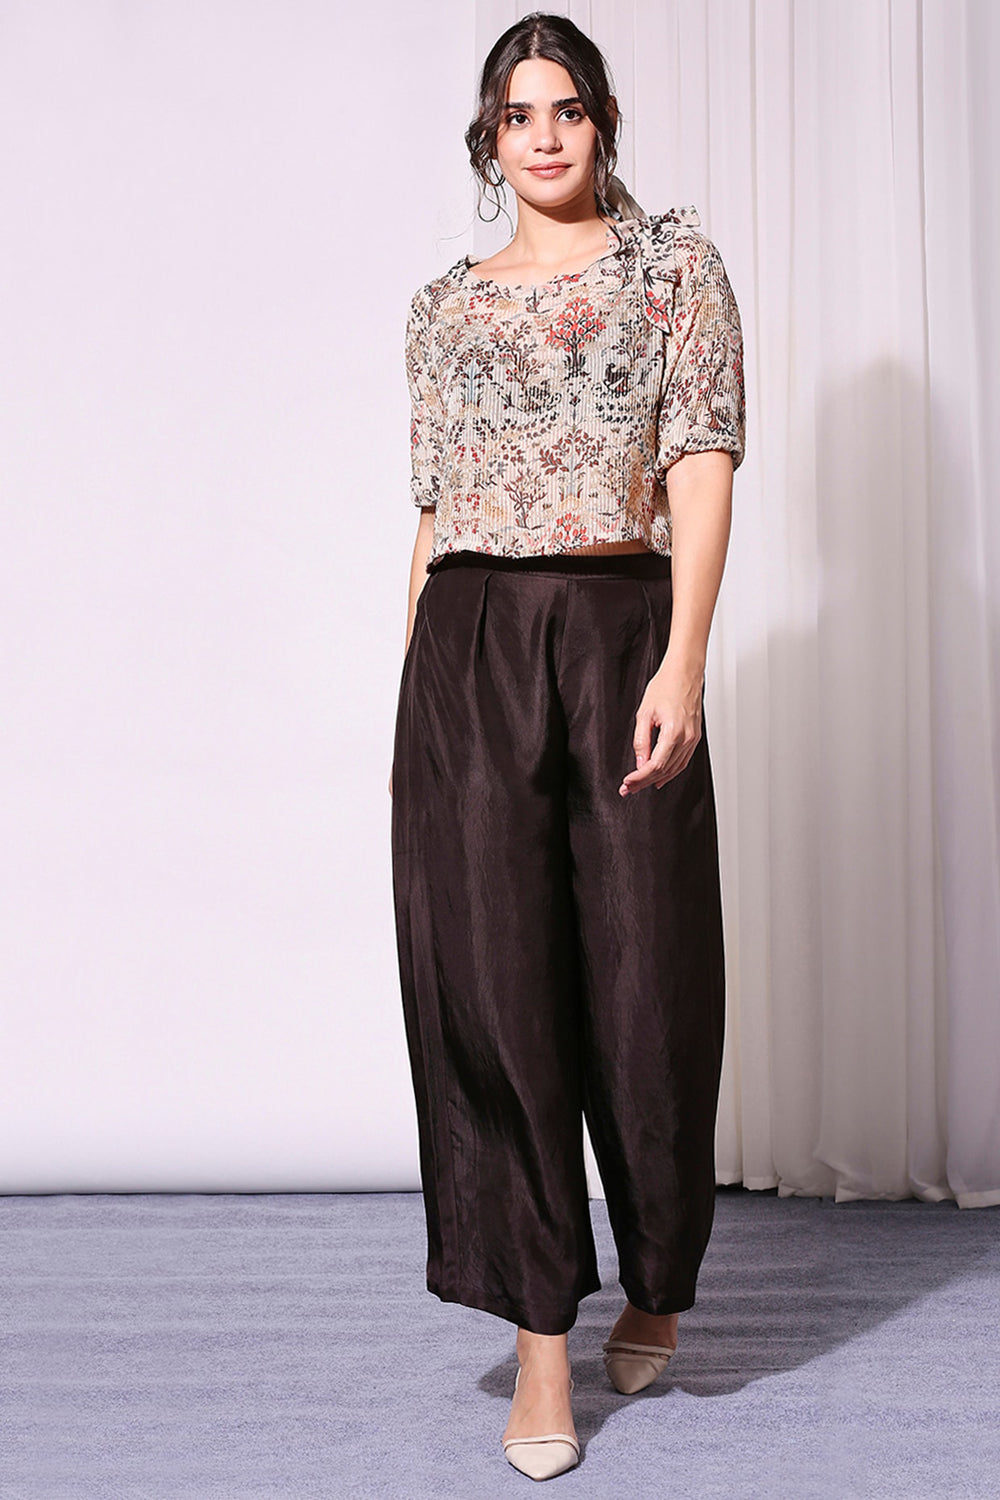 Printed Sequin Off-Shoulder Top Paired With Pants